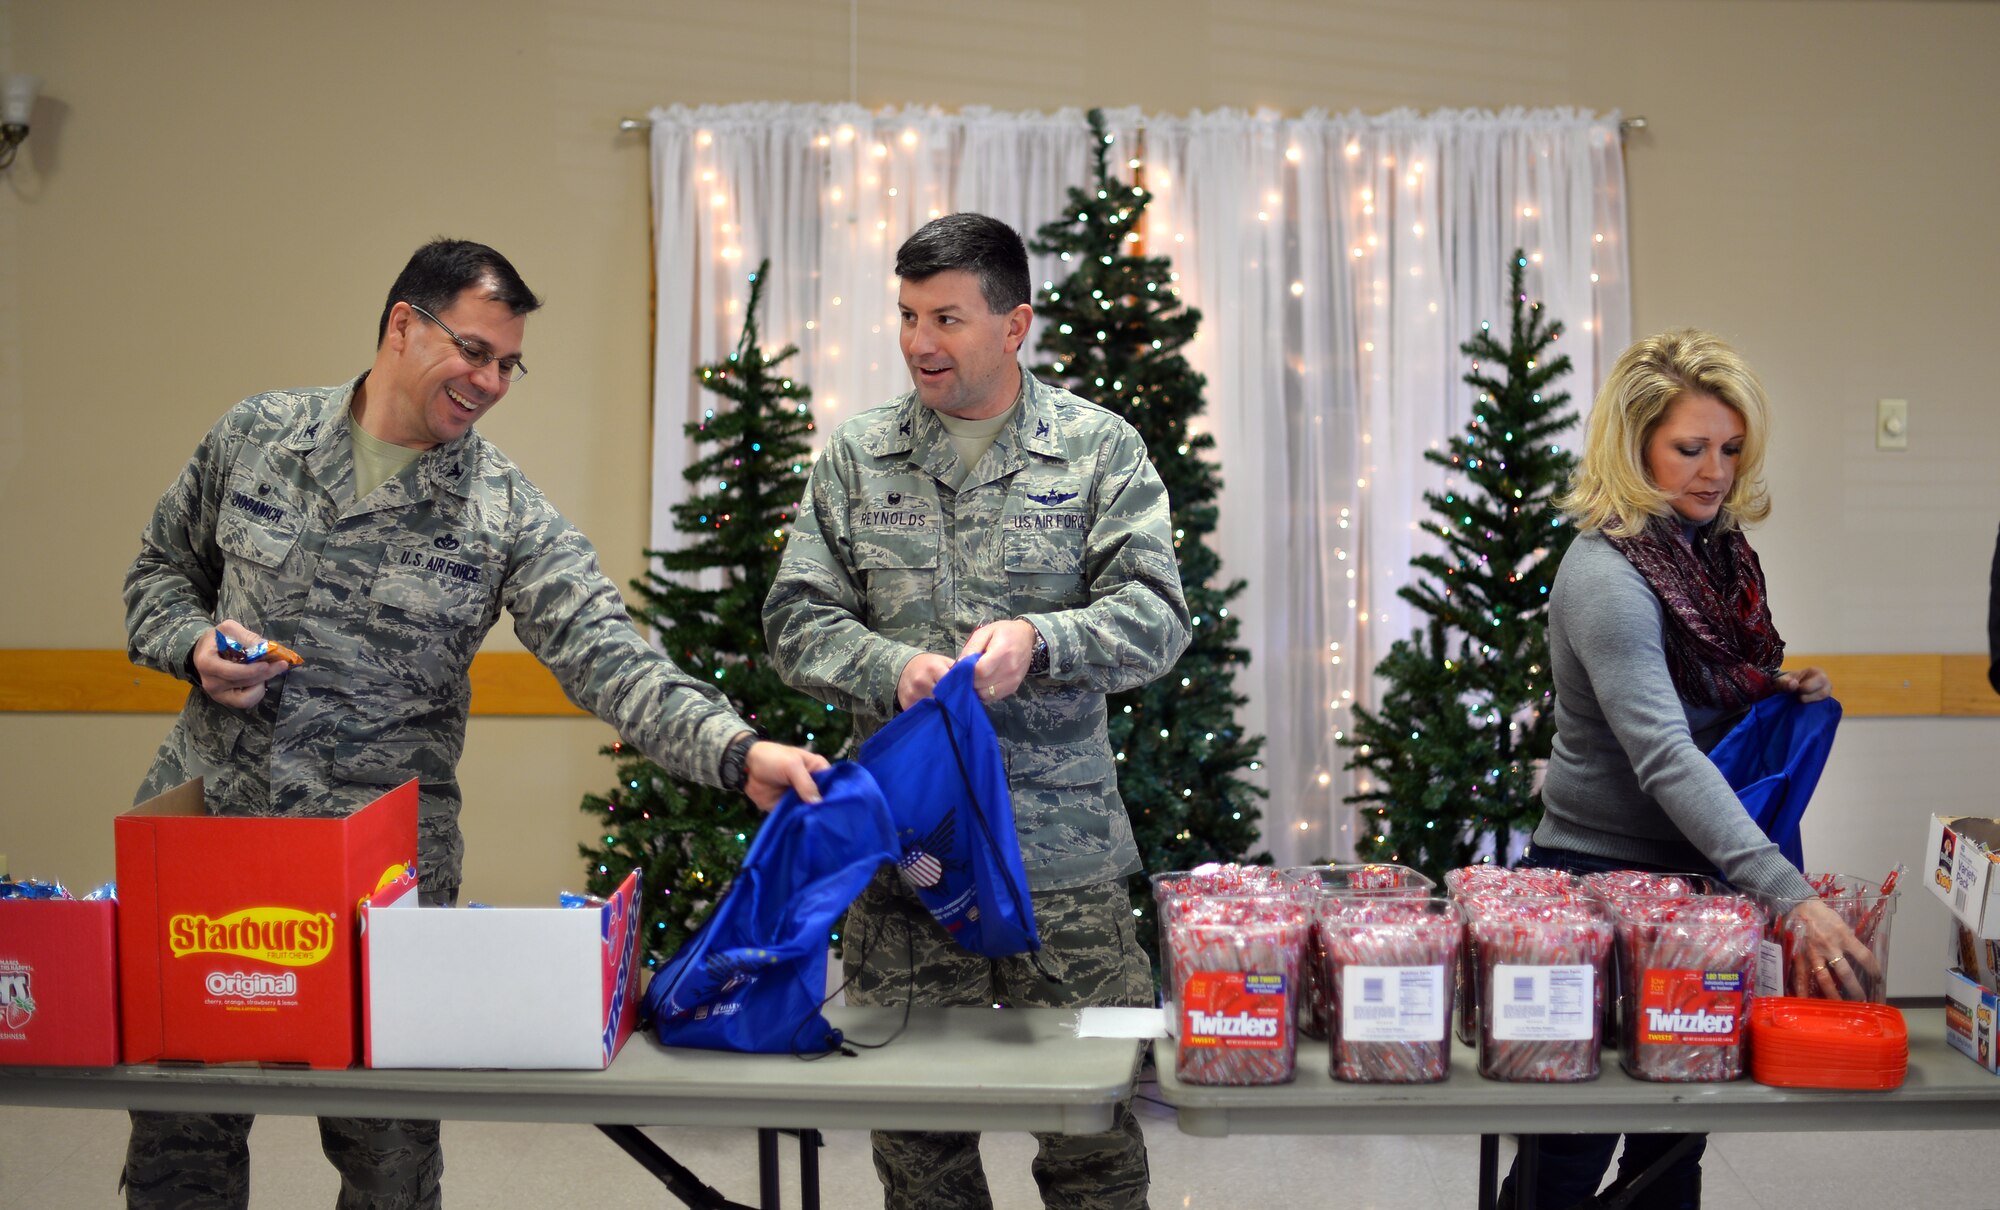 U.S. Air Force Col. Marty Reynolds, 55th Wing commander, his wife, Deanna, and U.S. Air Force Col. Matthew Joganich, 55th Mission Support Group commander, fill gift bags that will be donated to Airmen living in the Offutt Air Force Base, Neb., dormitories this holiday season at the Bellevue Fire House on Dec. 17, Bellevue, Neb.  Local area businesses show their support by donating to the gift bags as well as volunteering to fill and distribute them.  (U.S. Air Force photo by Josh Plueger)